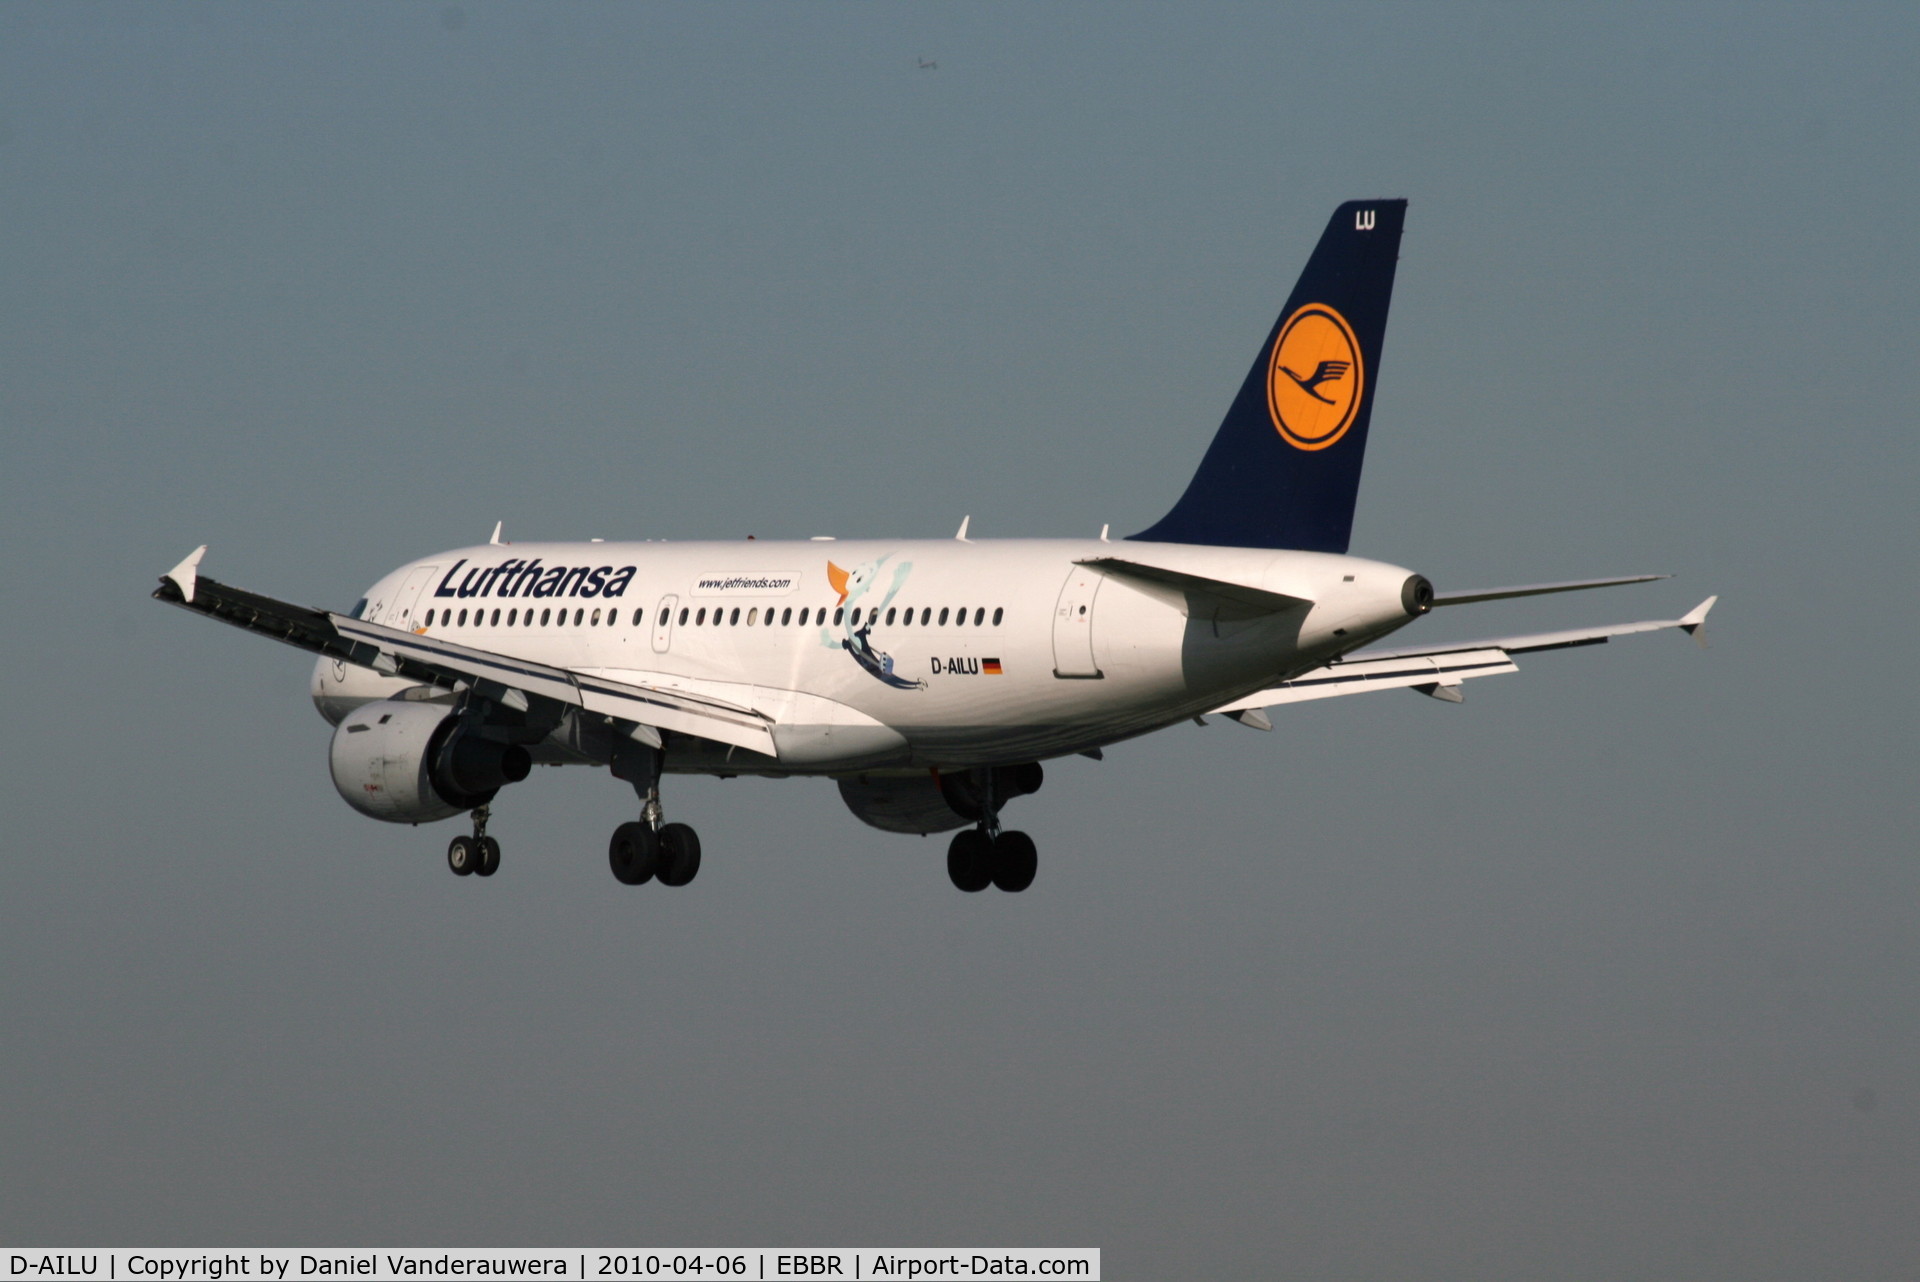 D-AILU, 1997 Airbus A319-114 C/N 744, Several seconds before landing on RWY 25L